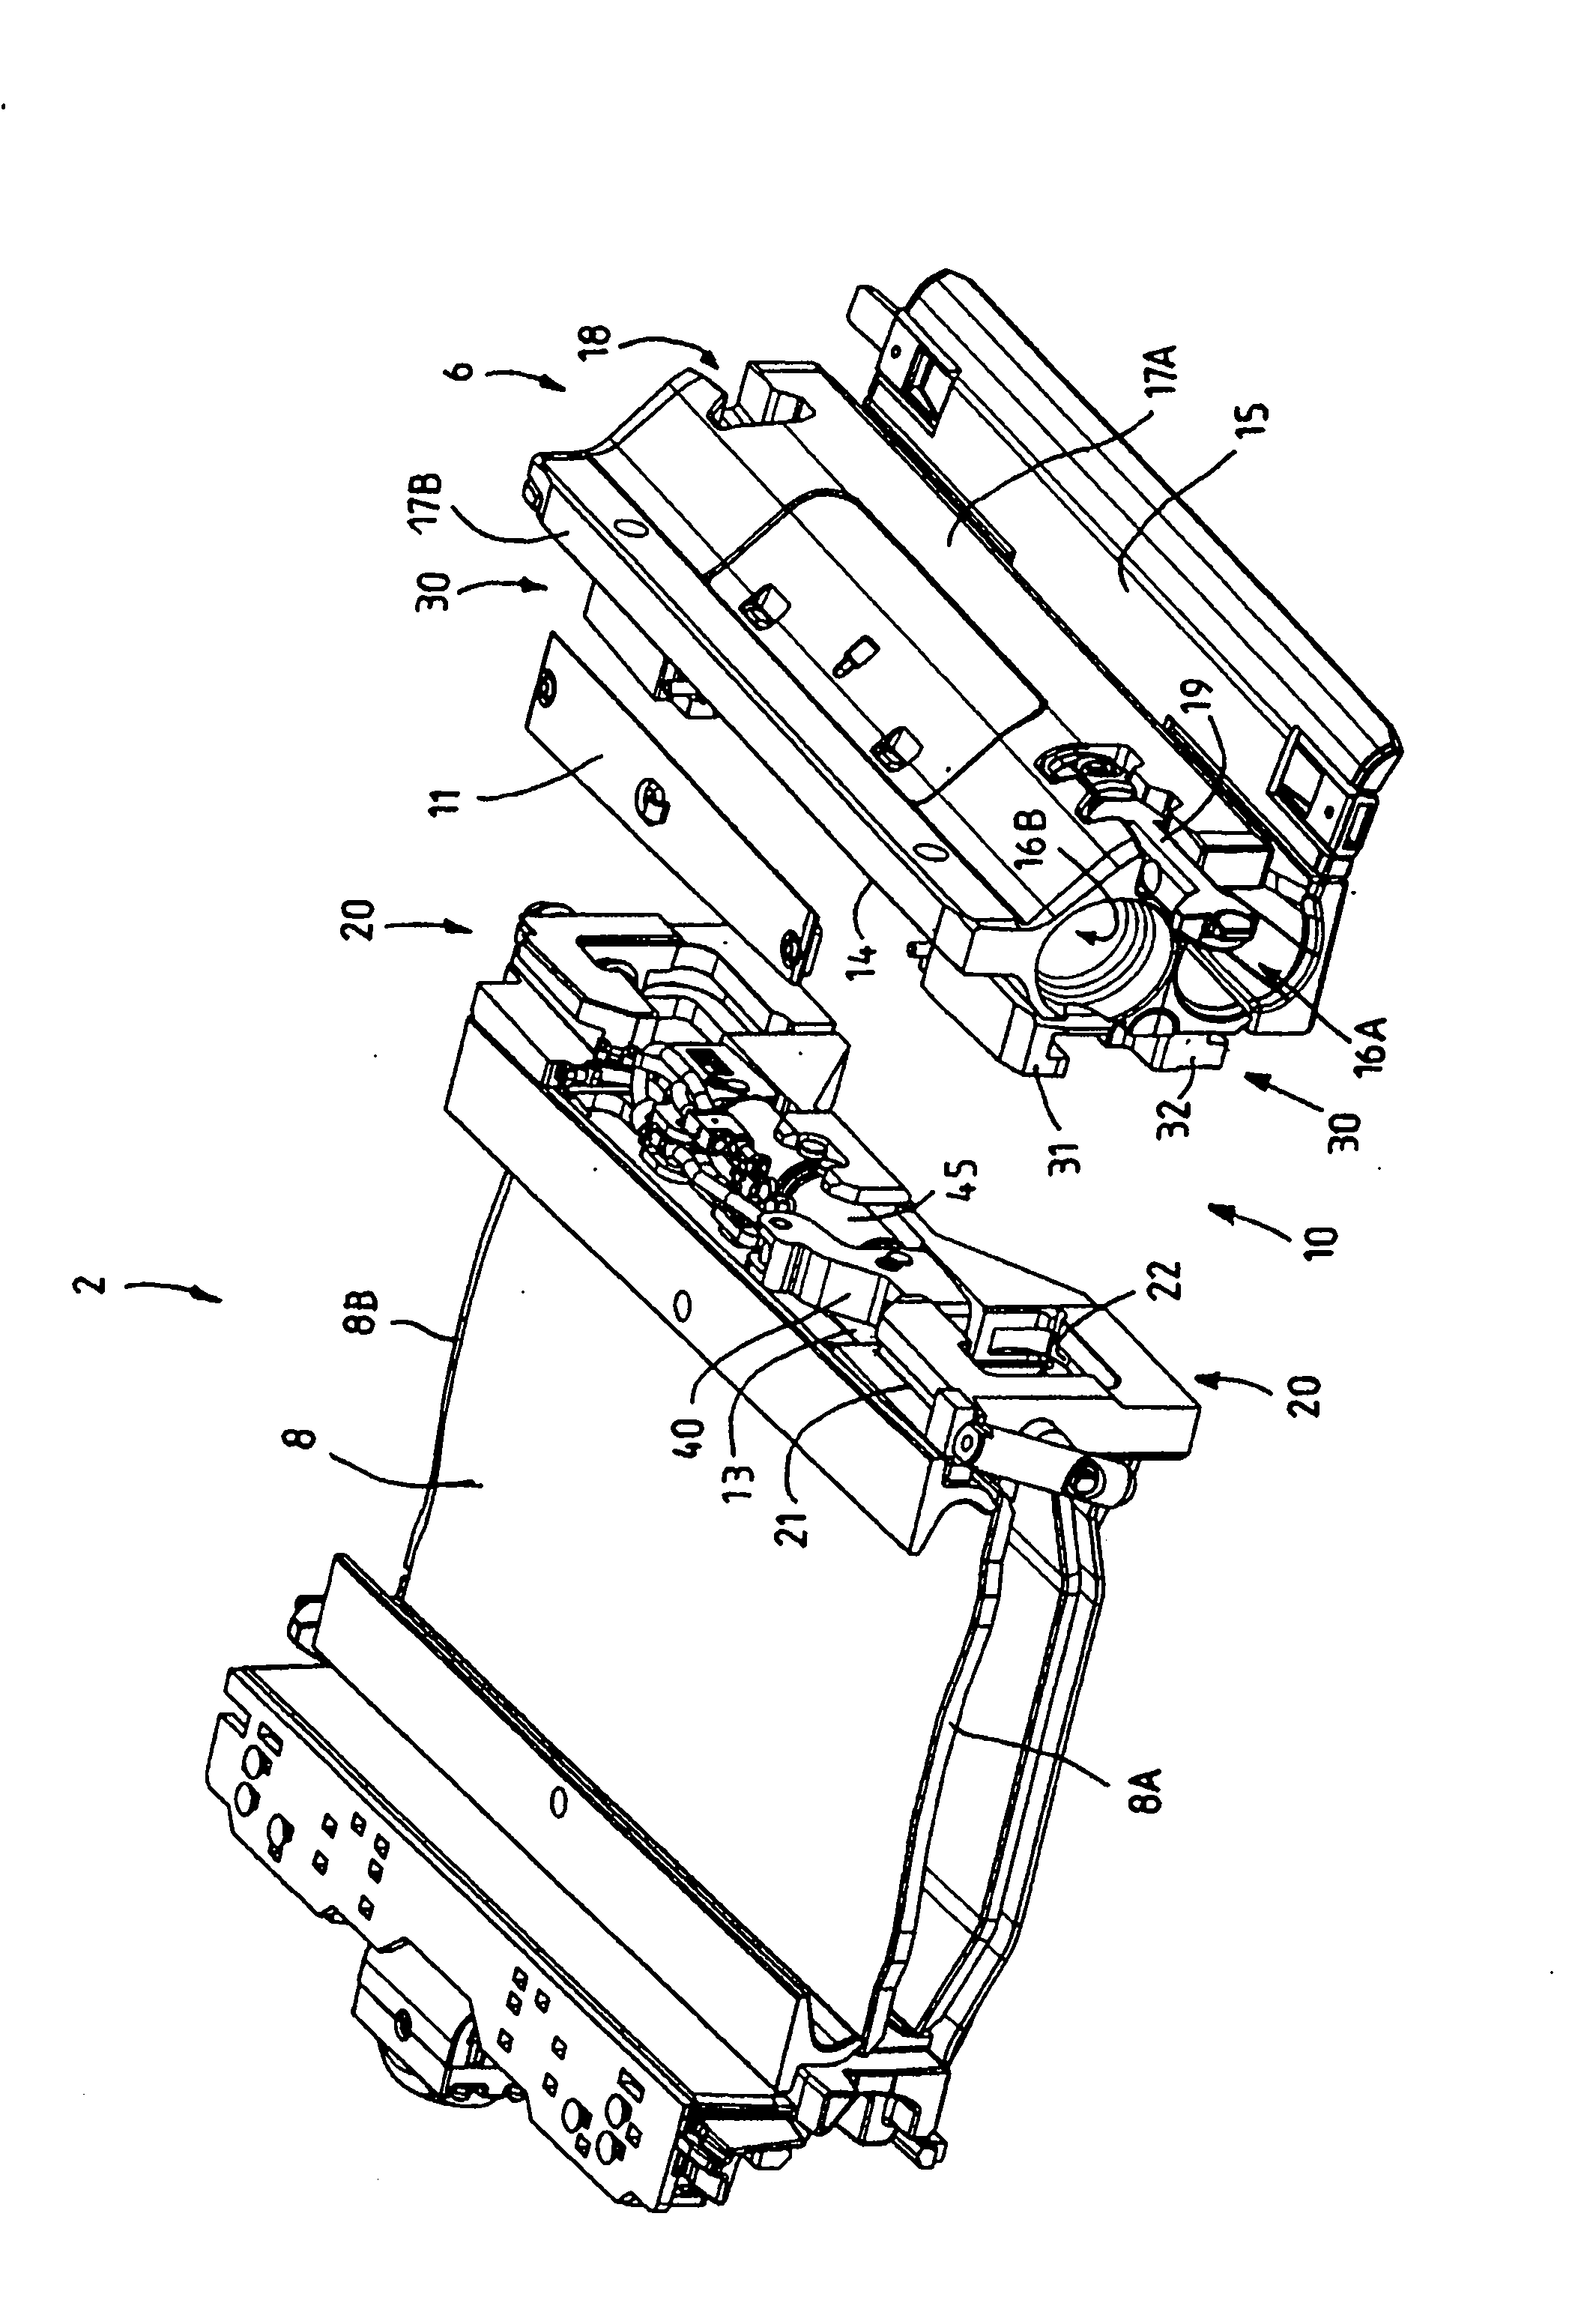 Connector device for trough pans on mining equipment trough pan and assembly component for the same